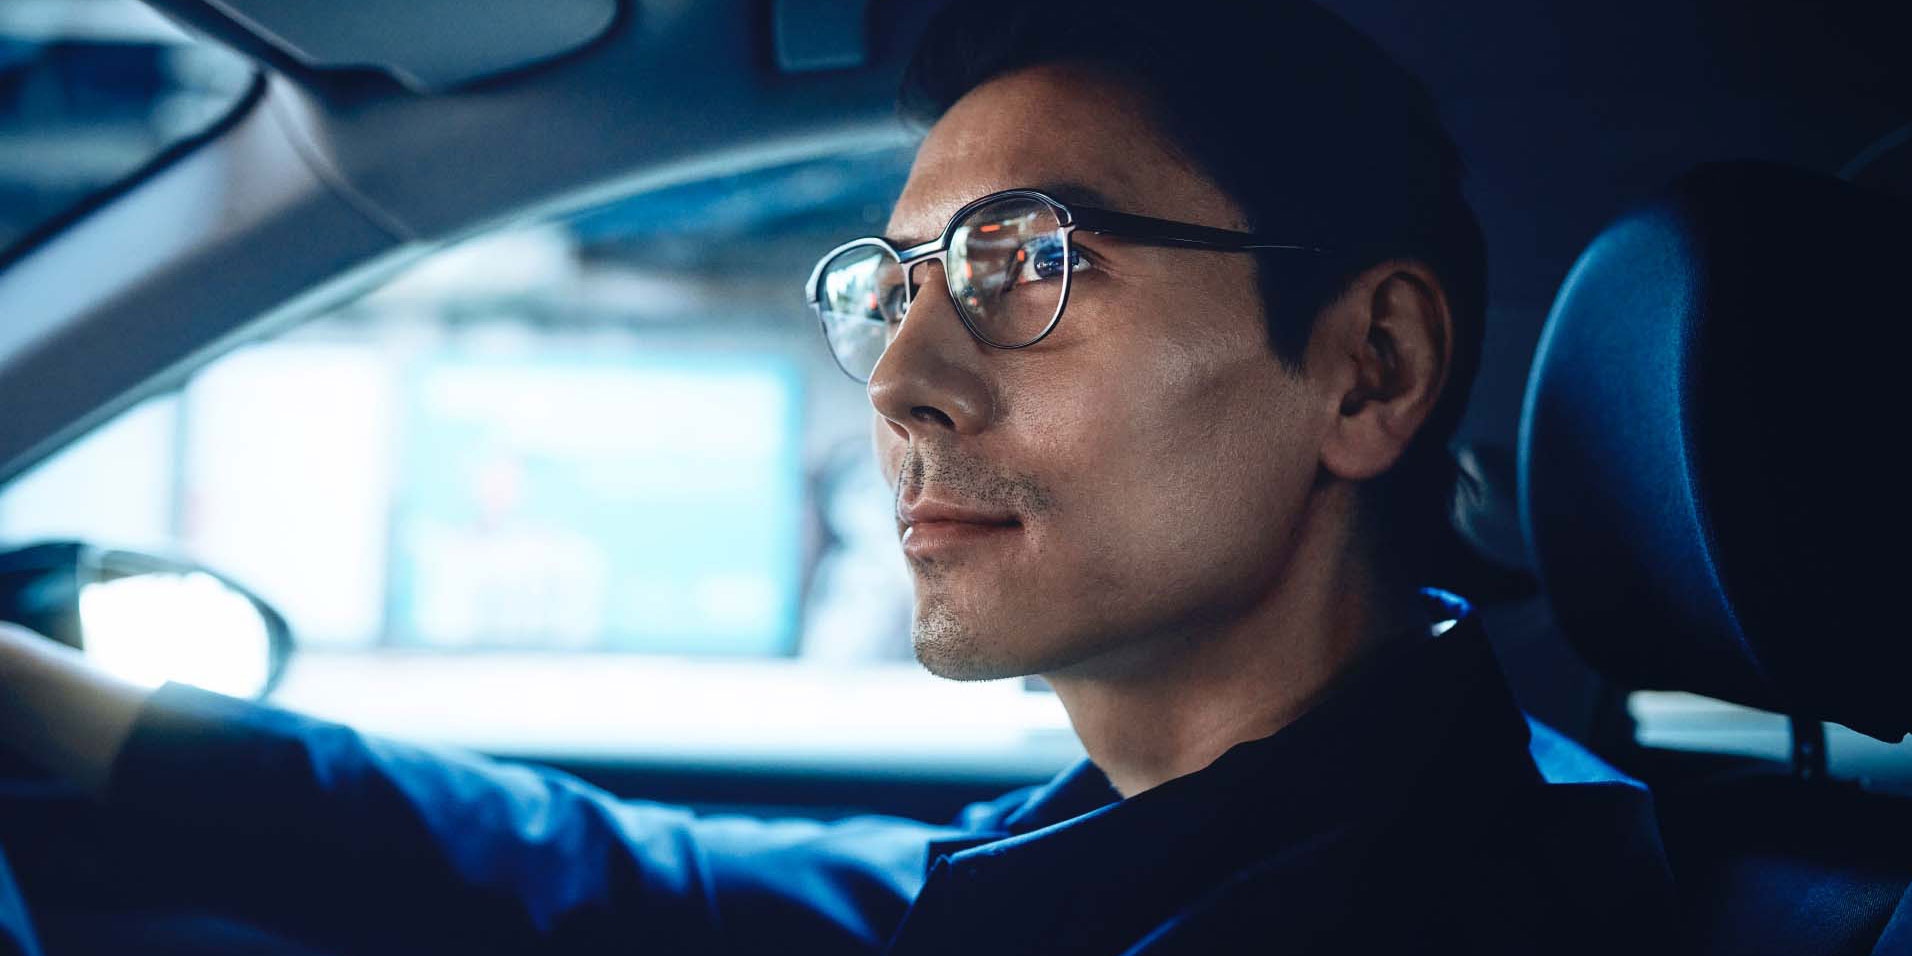 The best glasses for driving – reach your destination safely